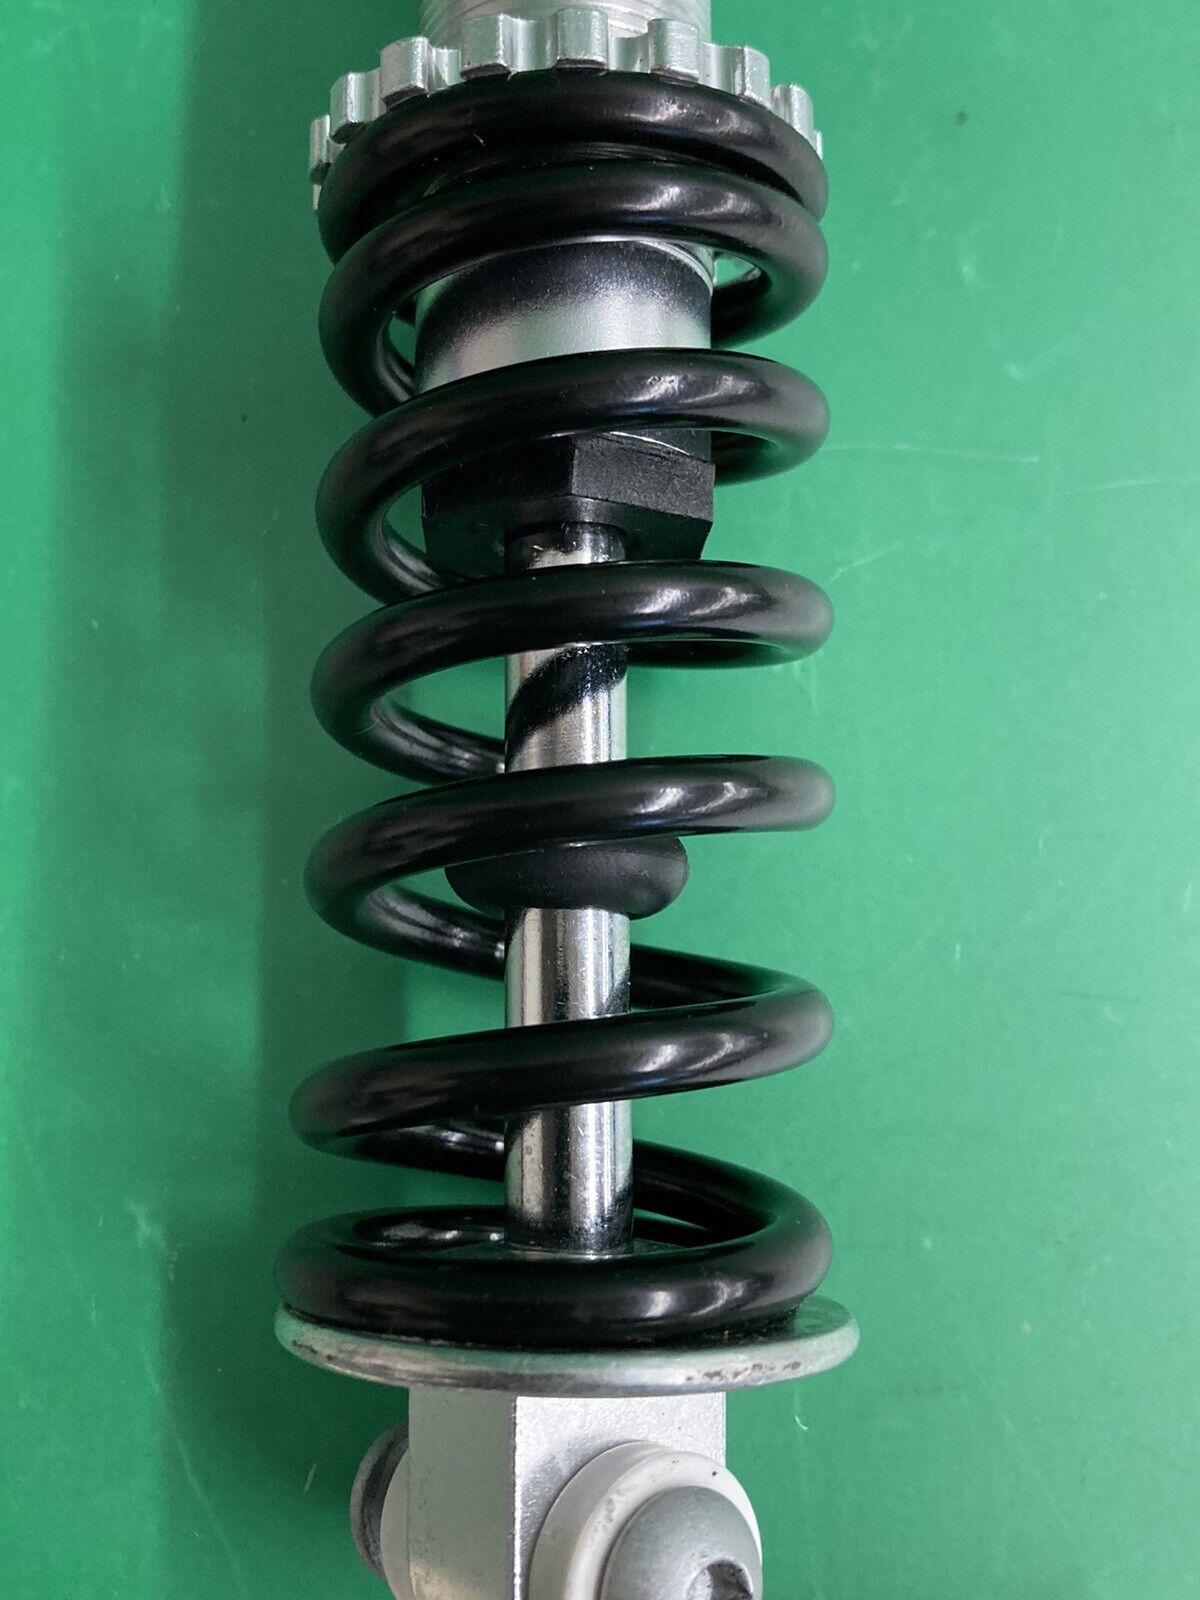 SINGLE SHOCK ABSORBER, SUSPENSION FOR THE CTM HS-2800 POWER WHEELCHAIR #J473